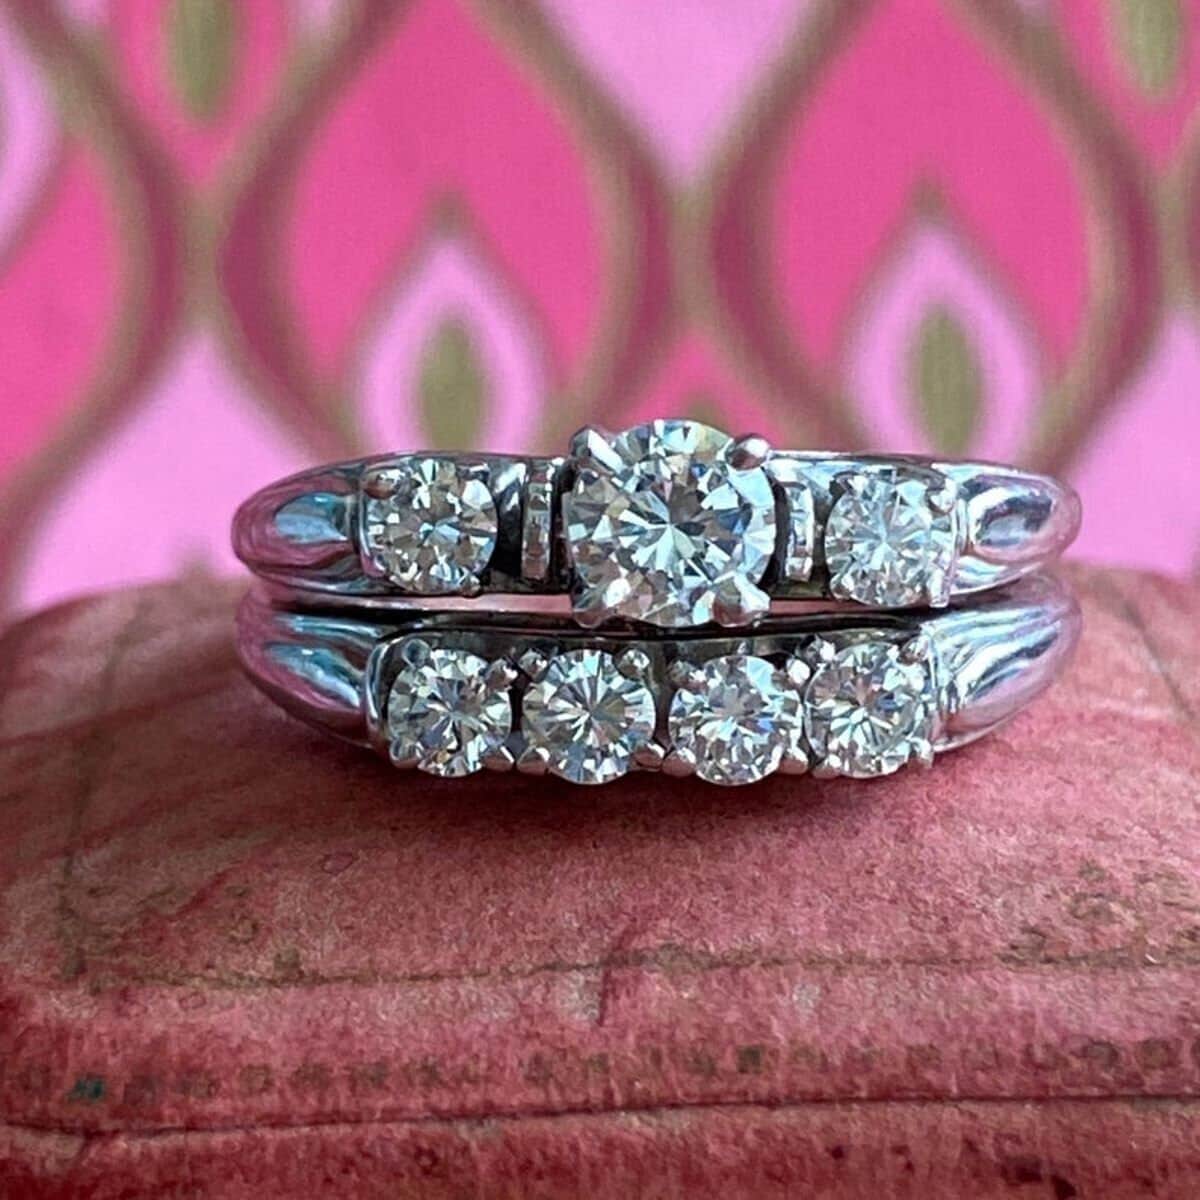 The Best 10 Best Antique and Vintage Wedding Bands